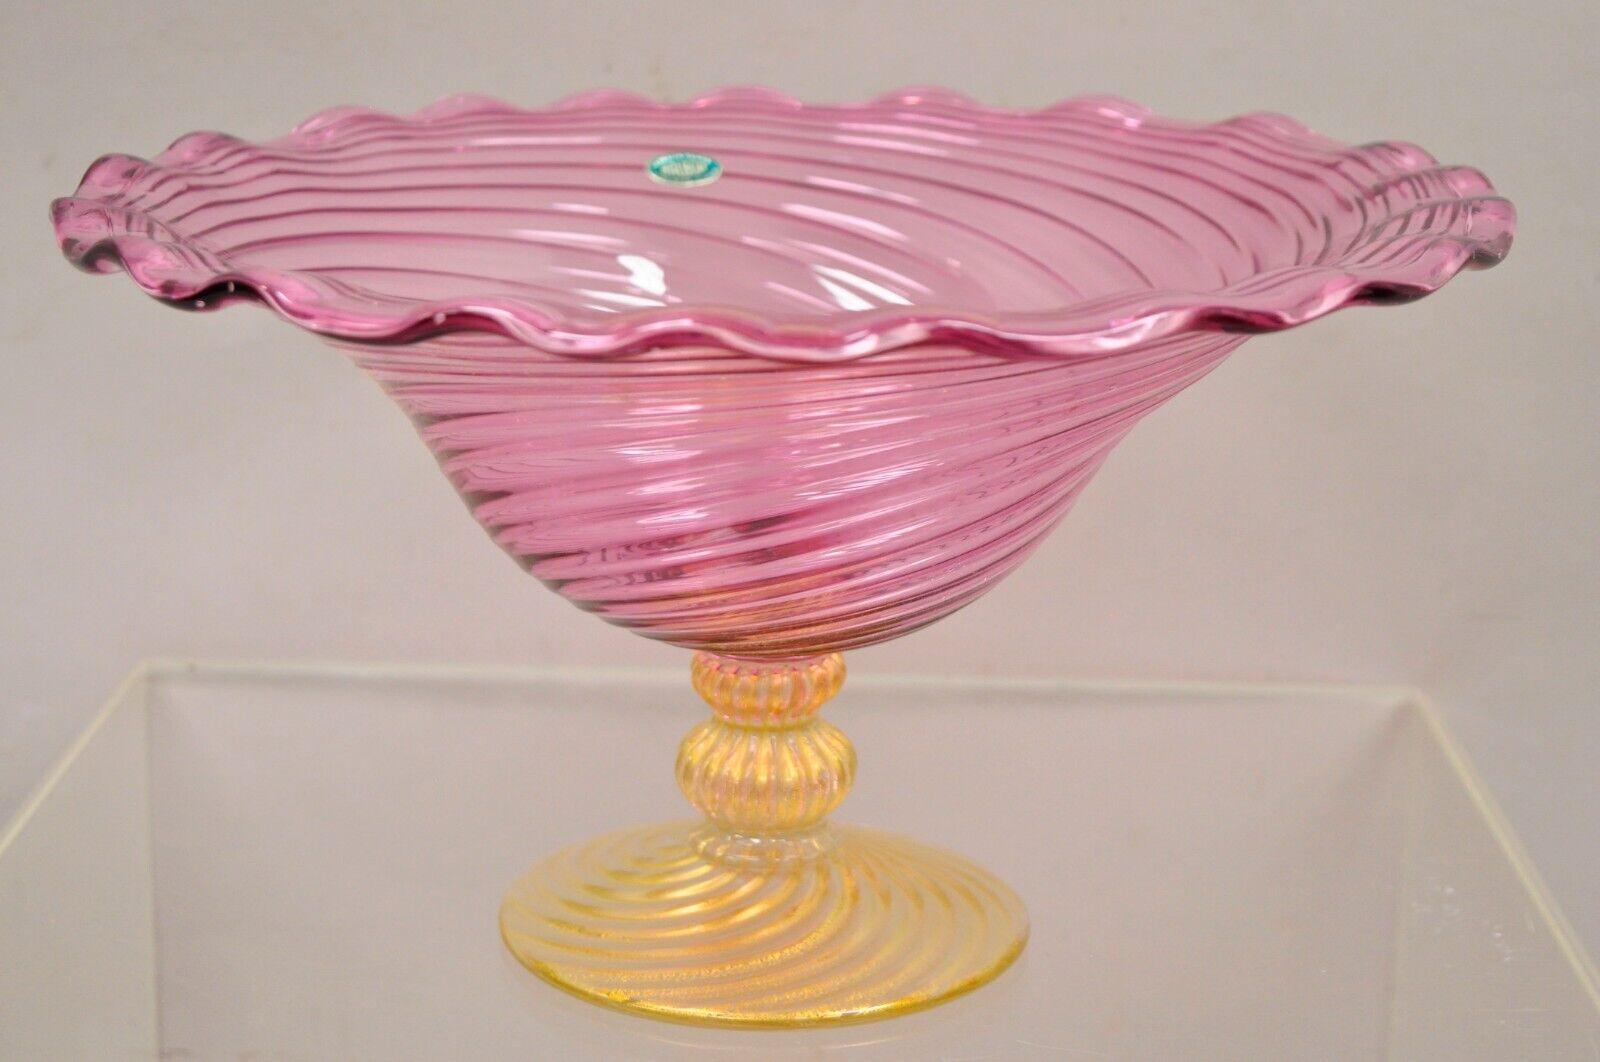 Fratelli Toso Balboa Venetian blown art glass pink swirl gold flecks fruit bowl. Item features a gold flecks pedestal base, pink blown art glass, swirl design, original label, very nice vintage item, great style and form, design by Fratelli Toso.